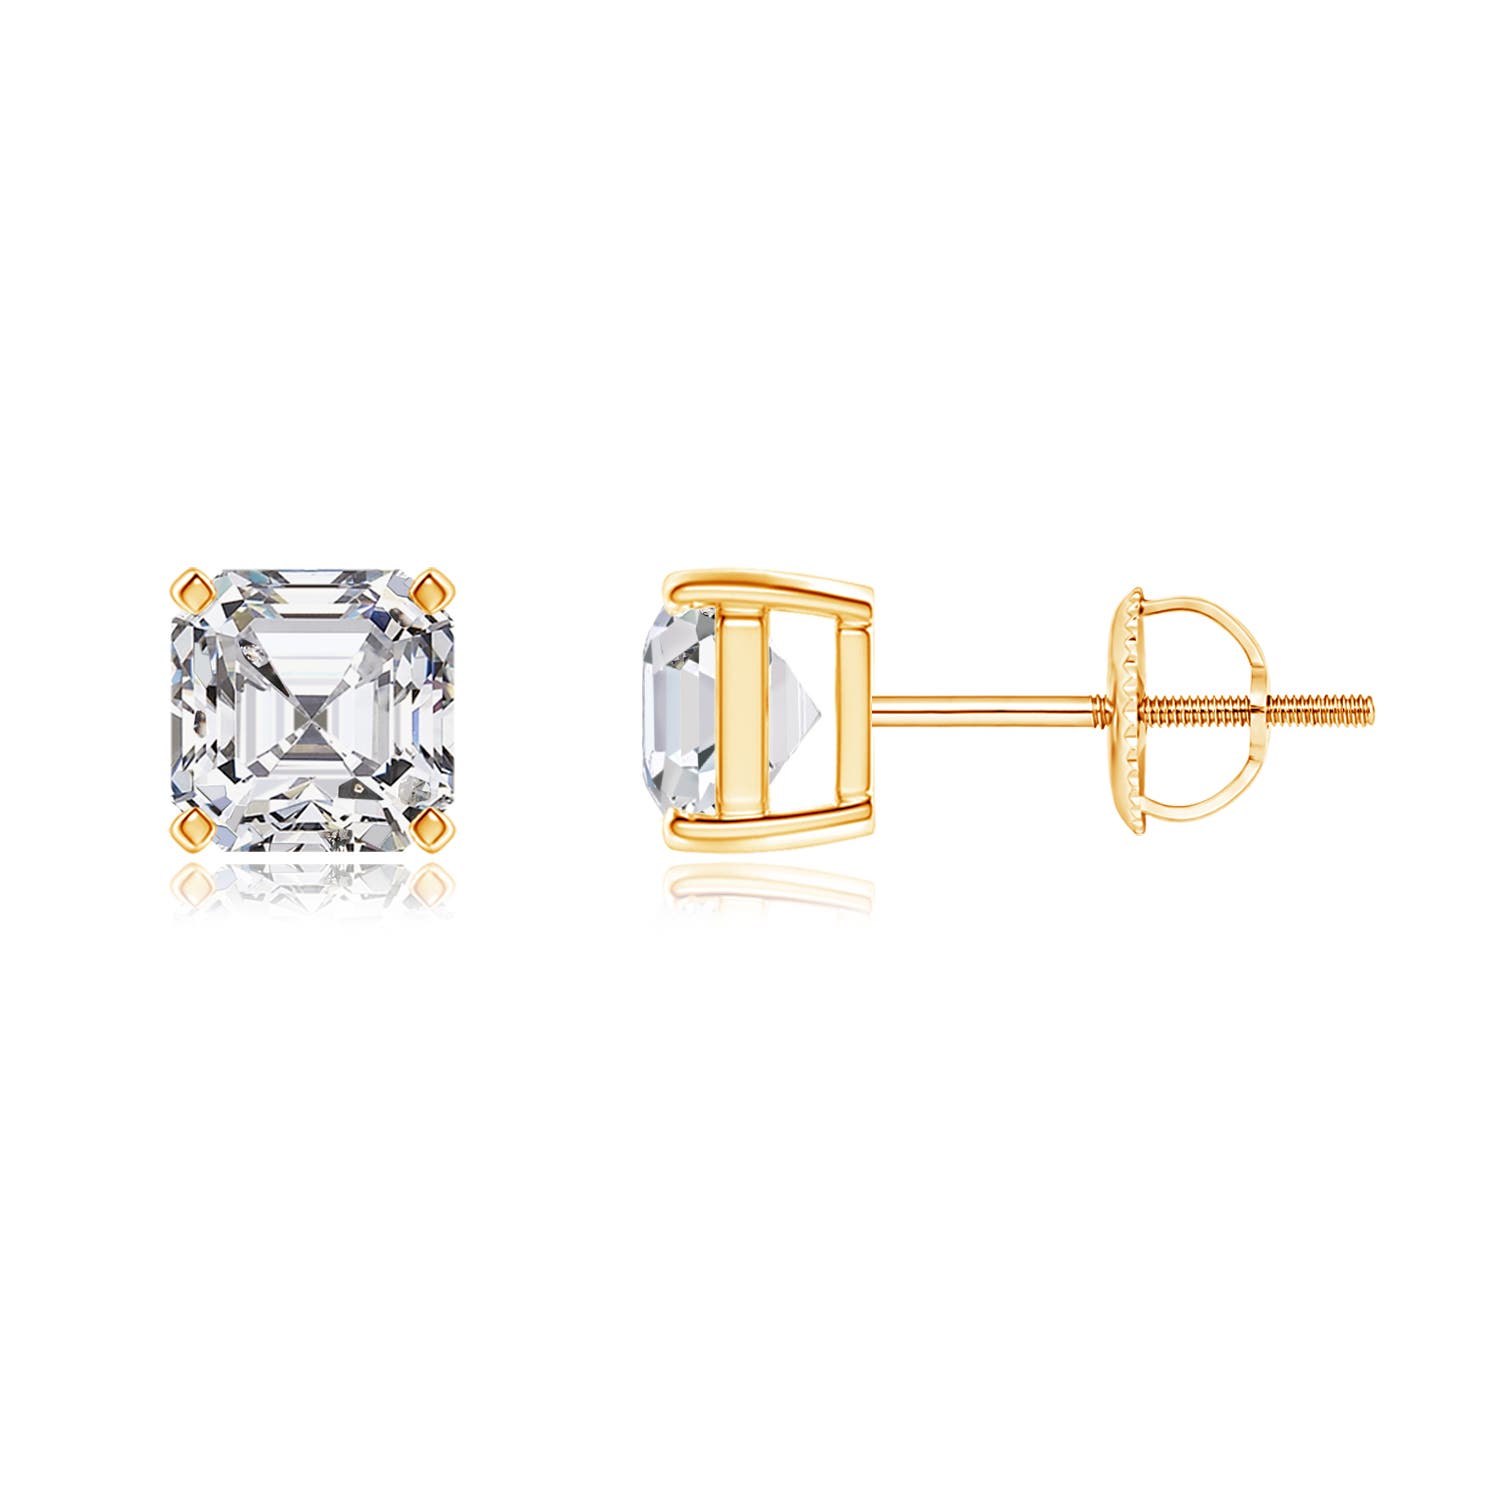 H, SI2 / 1.6 CT / 14 KT Yellow Gold